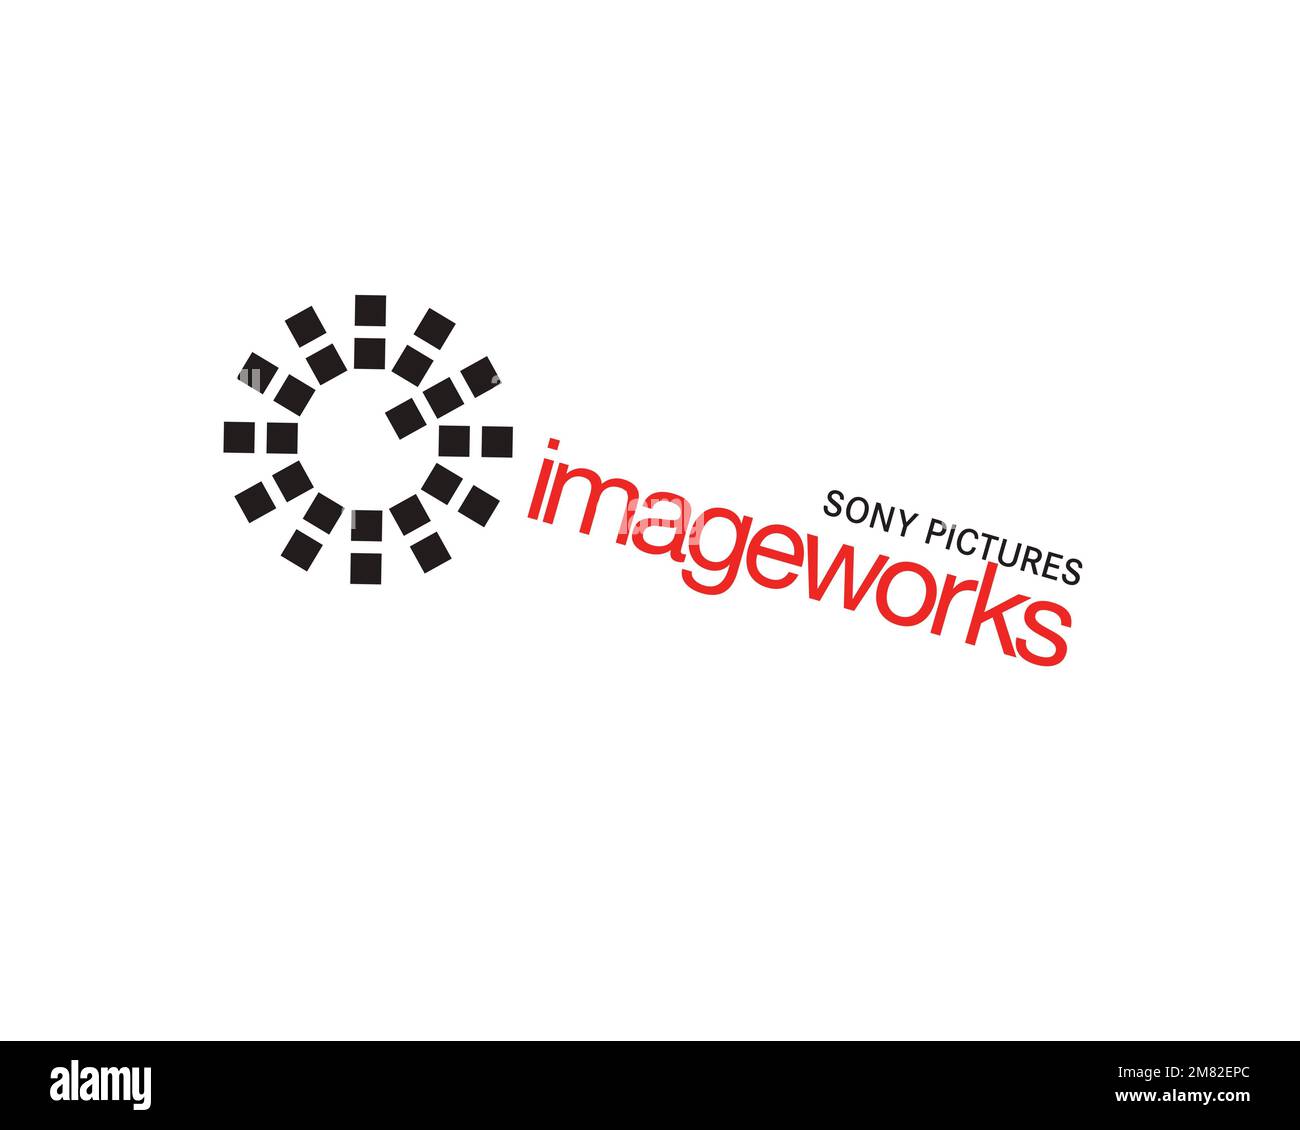 Sony Pictures Imageworks, rotated logo, white background B Stock Photo